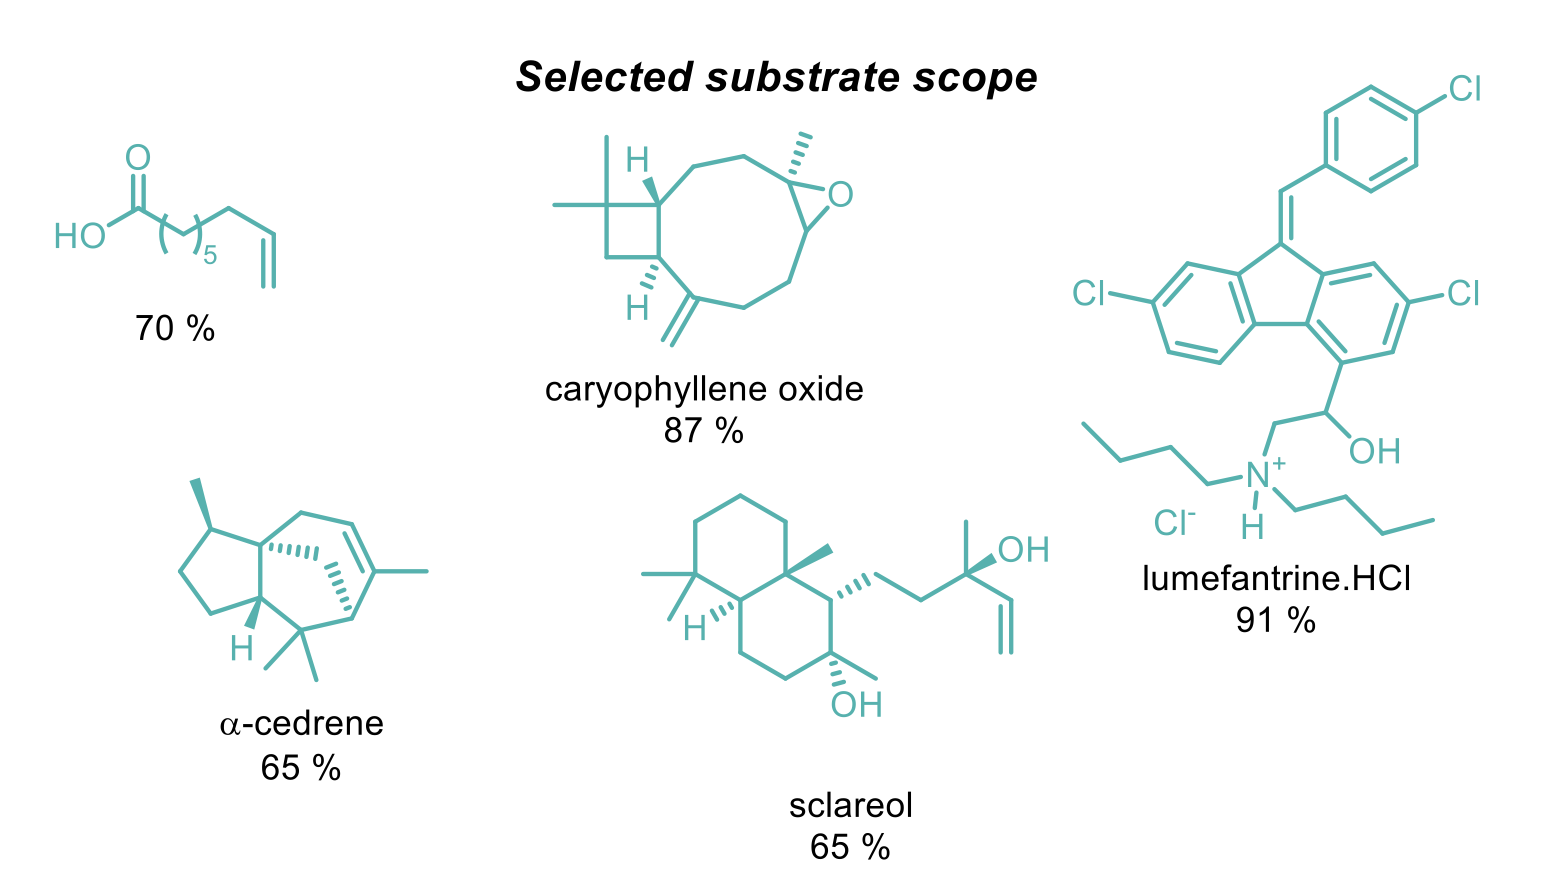 Selected substrate scope